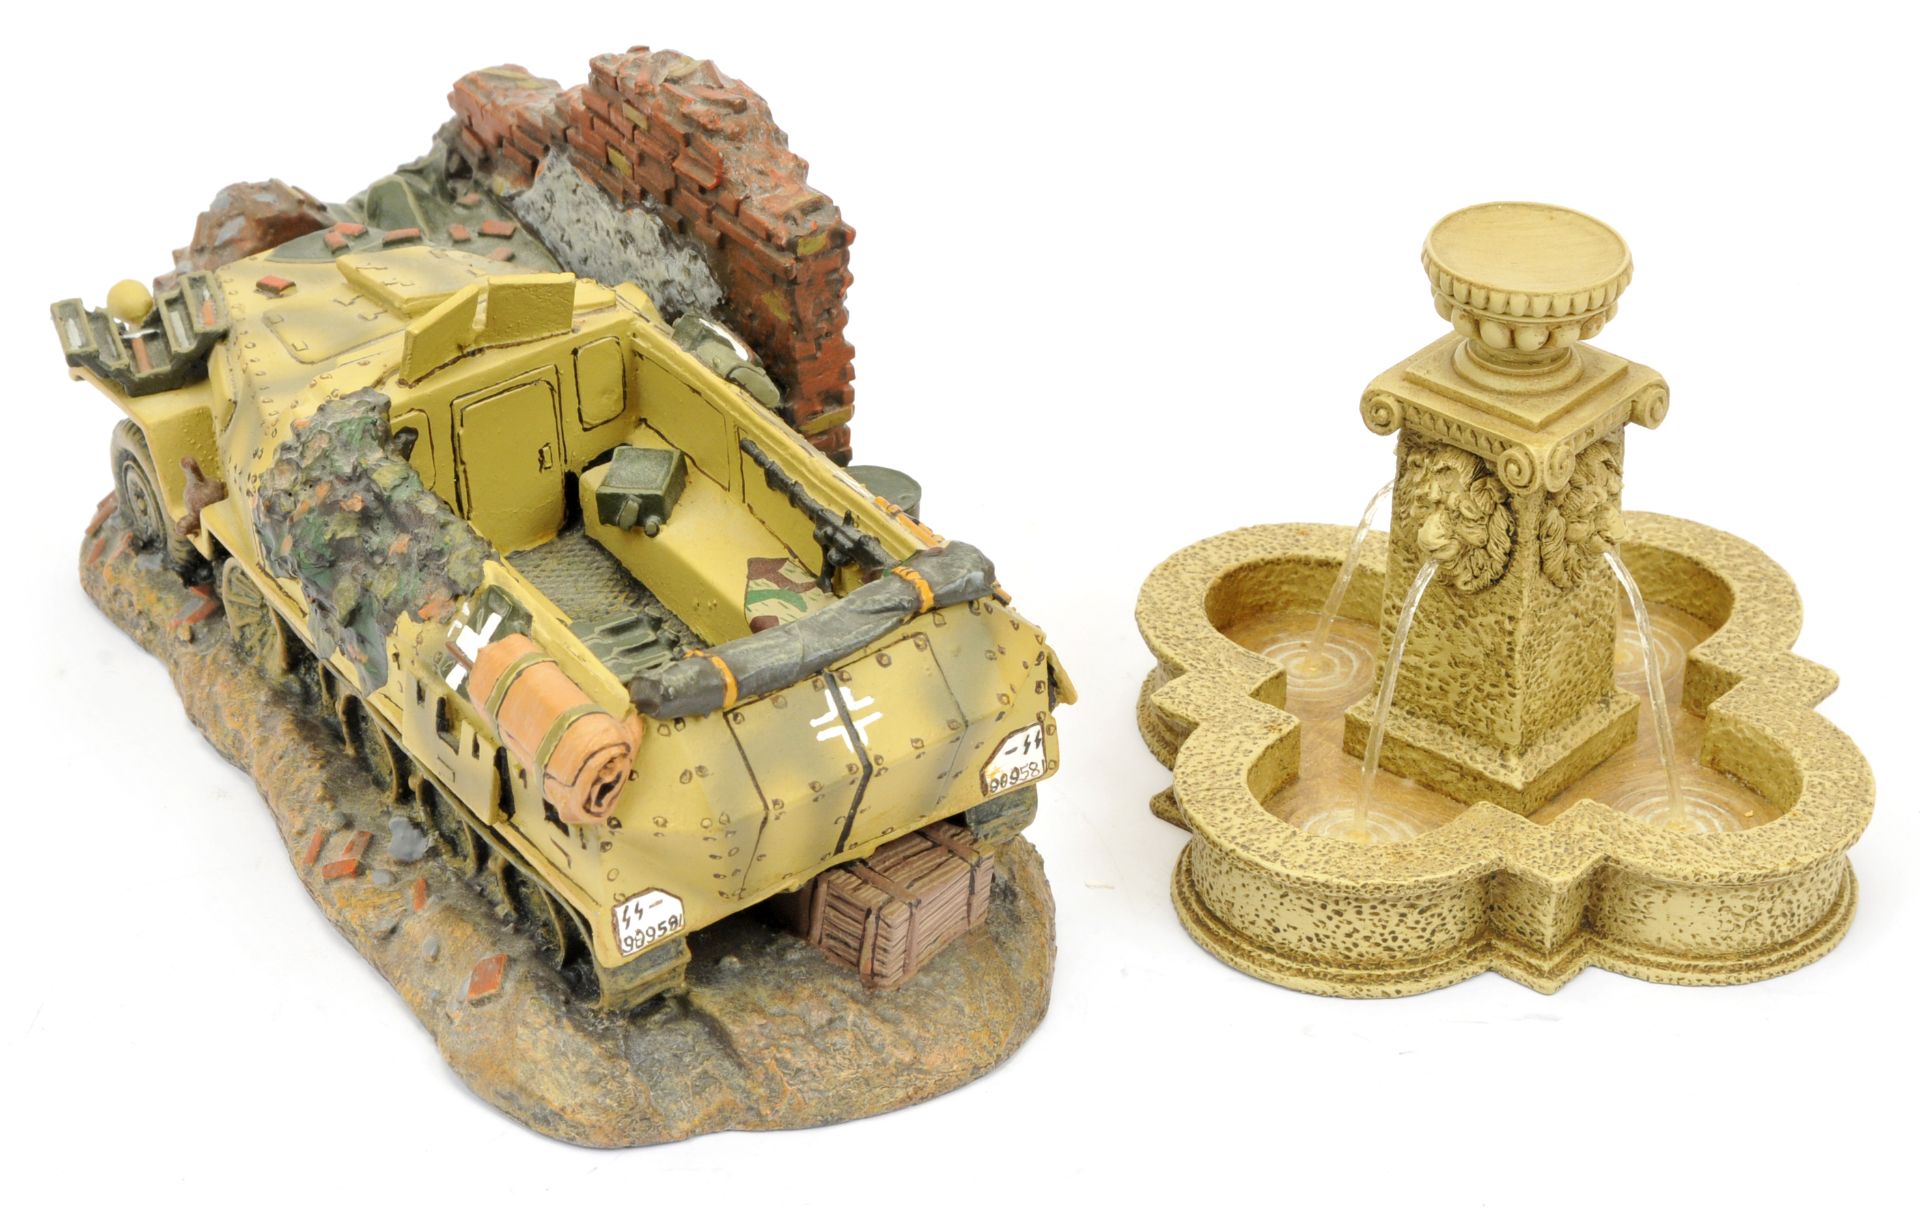 King & Country - Diorama Accessory Range - Image 2 of 2